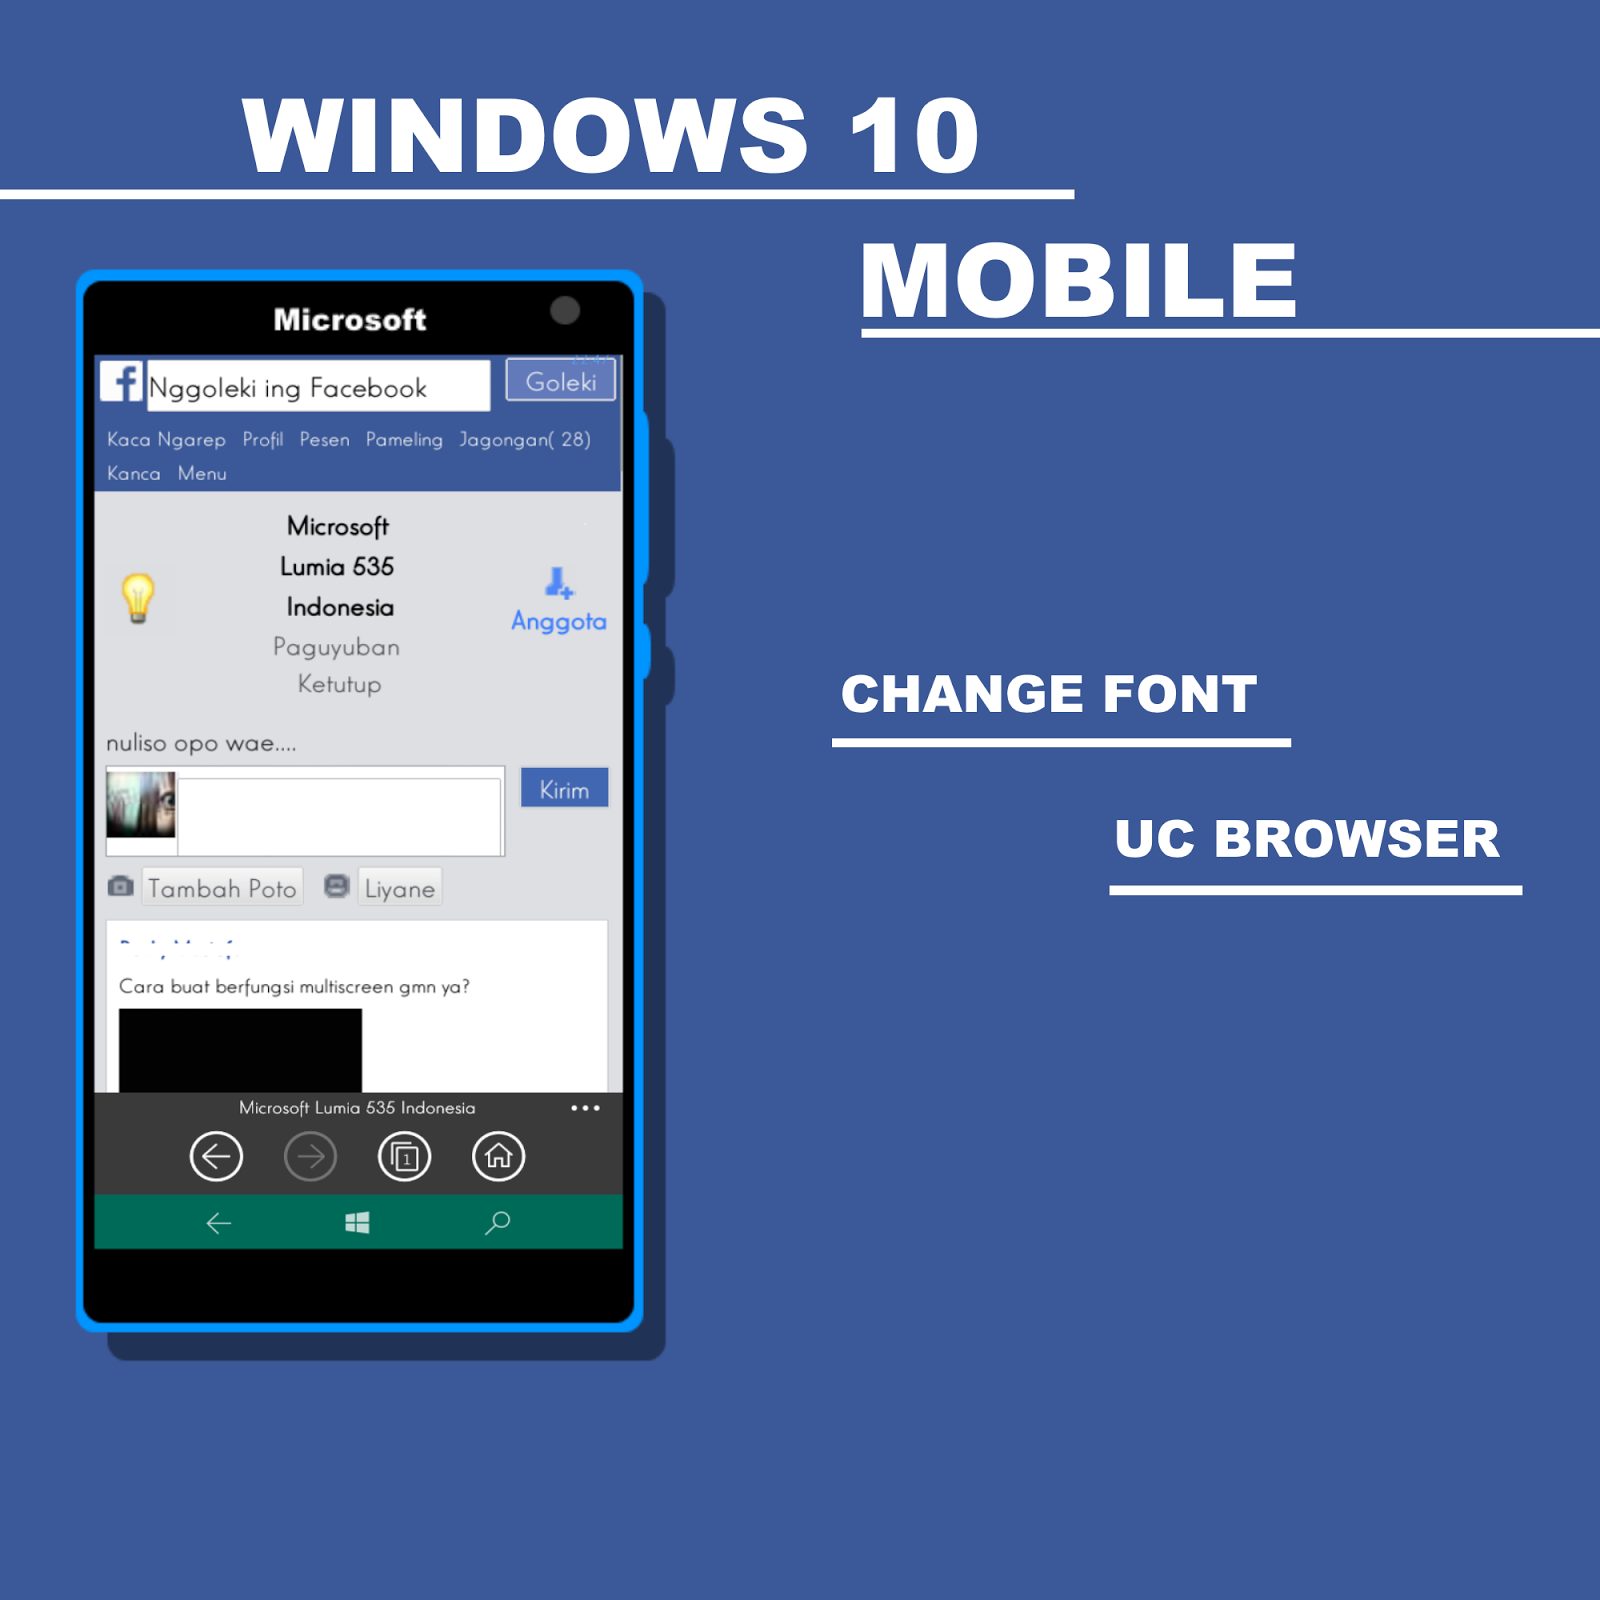 Download Uc Browser For Windows 10 Mobile